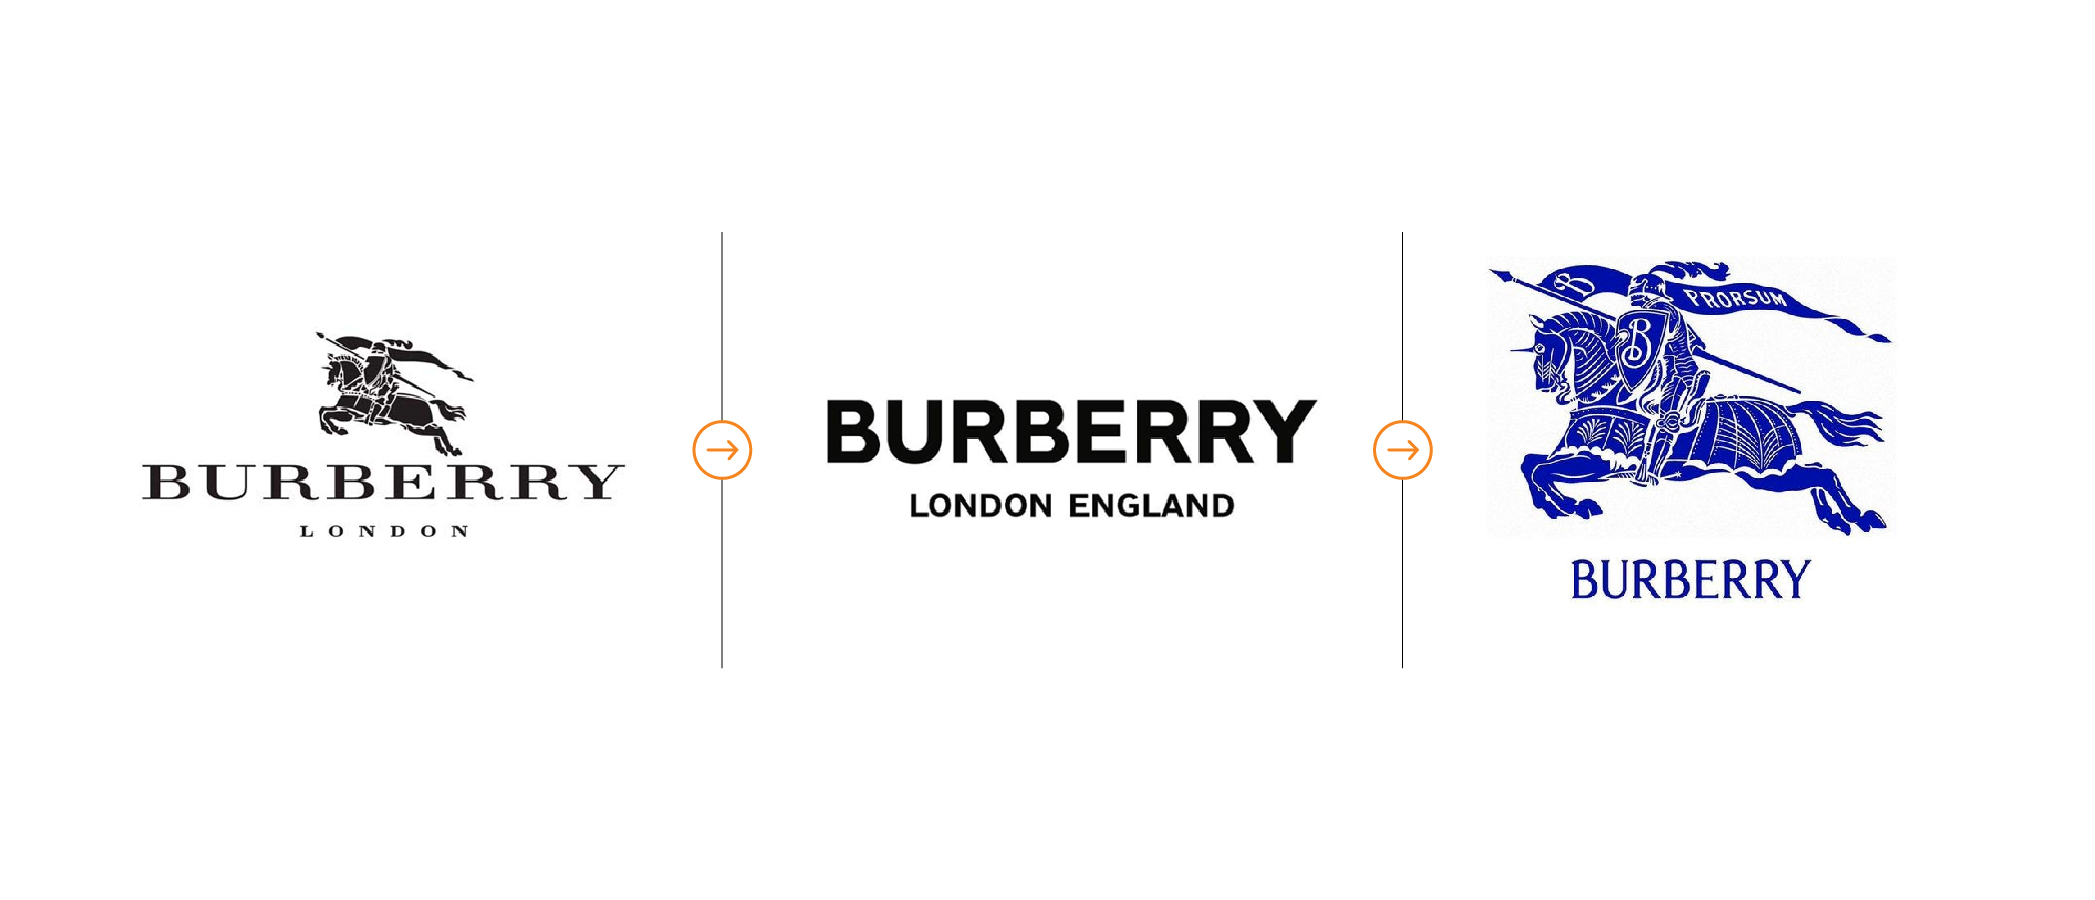 An image showing Burberry's logo evolution.